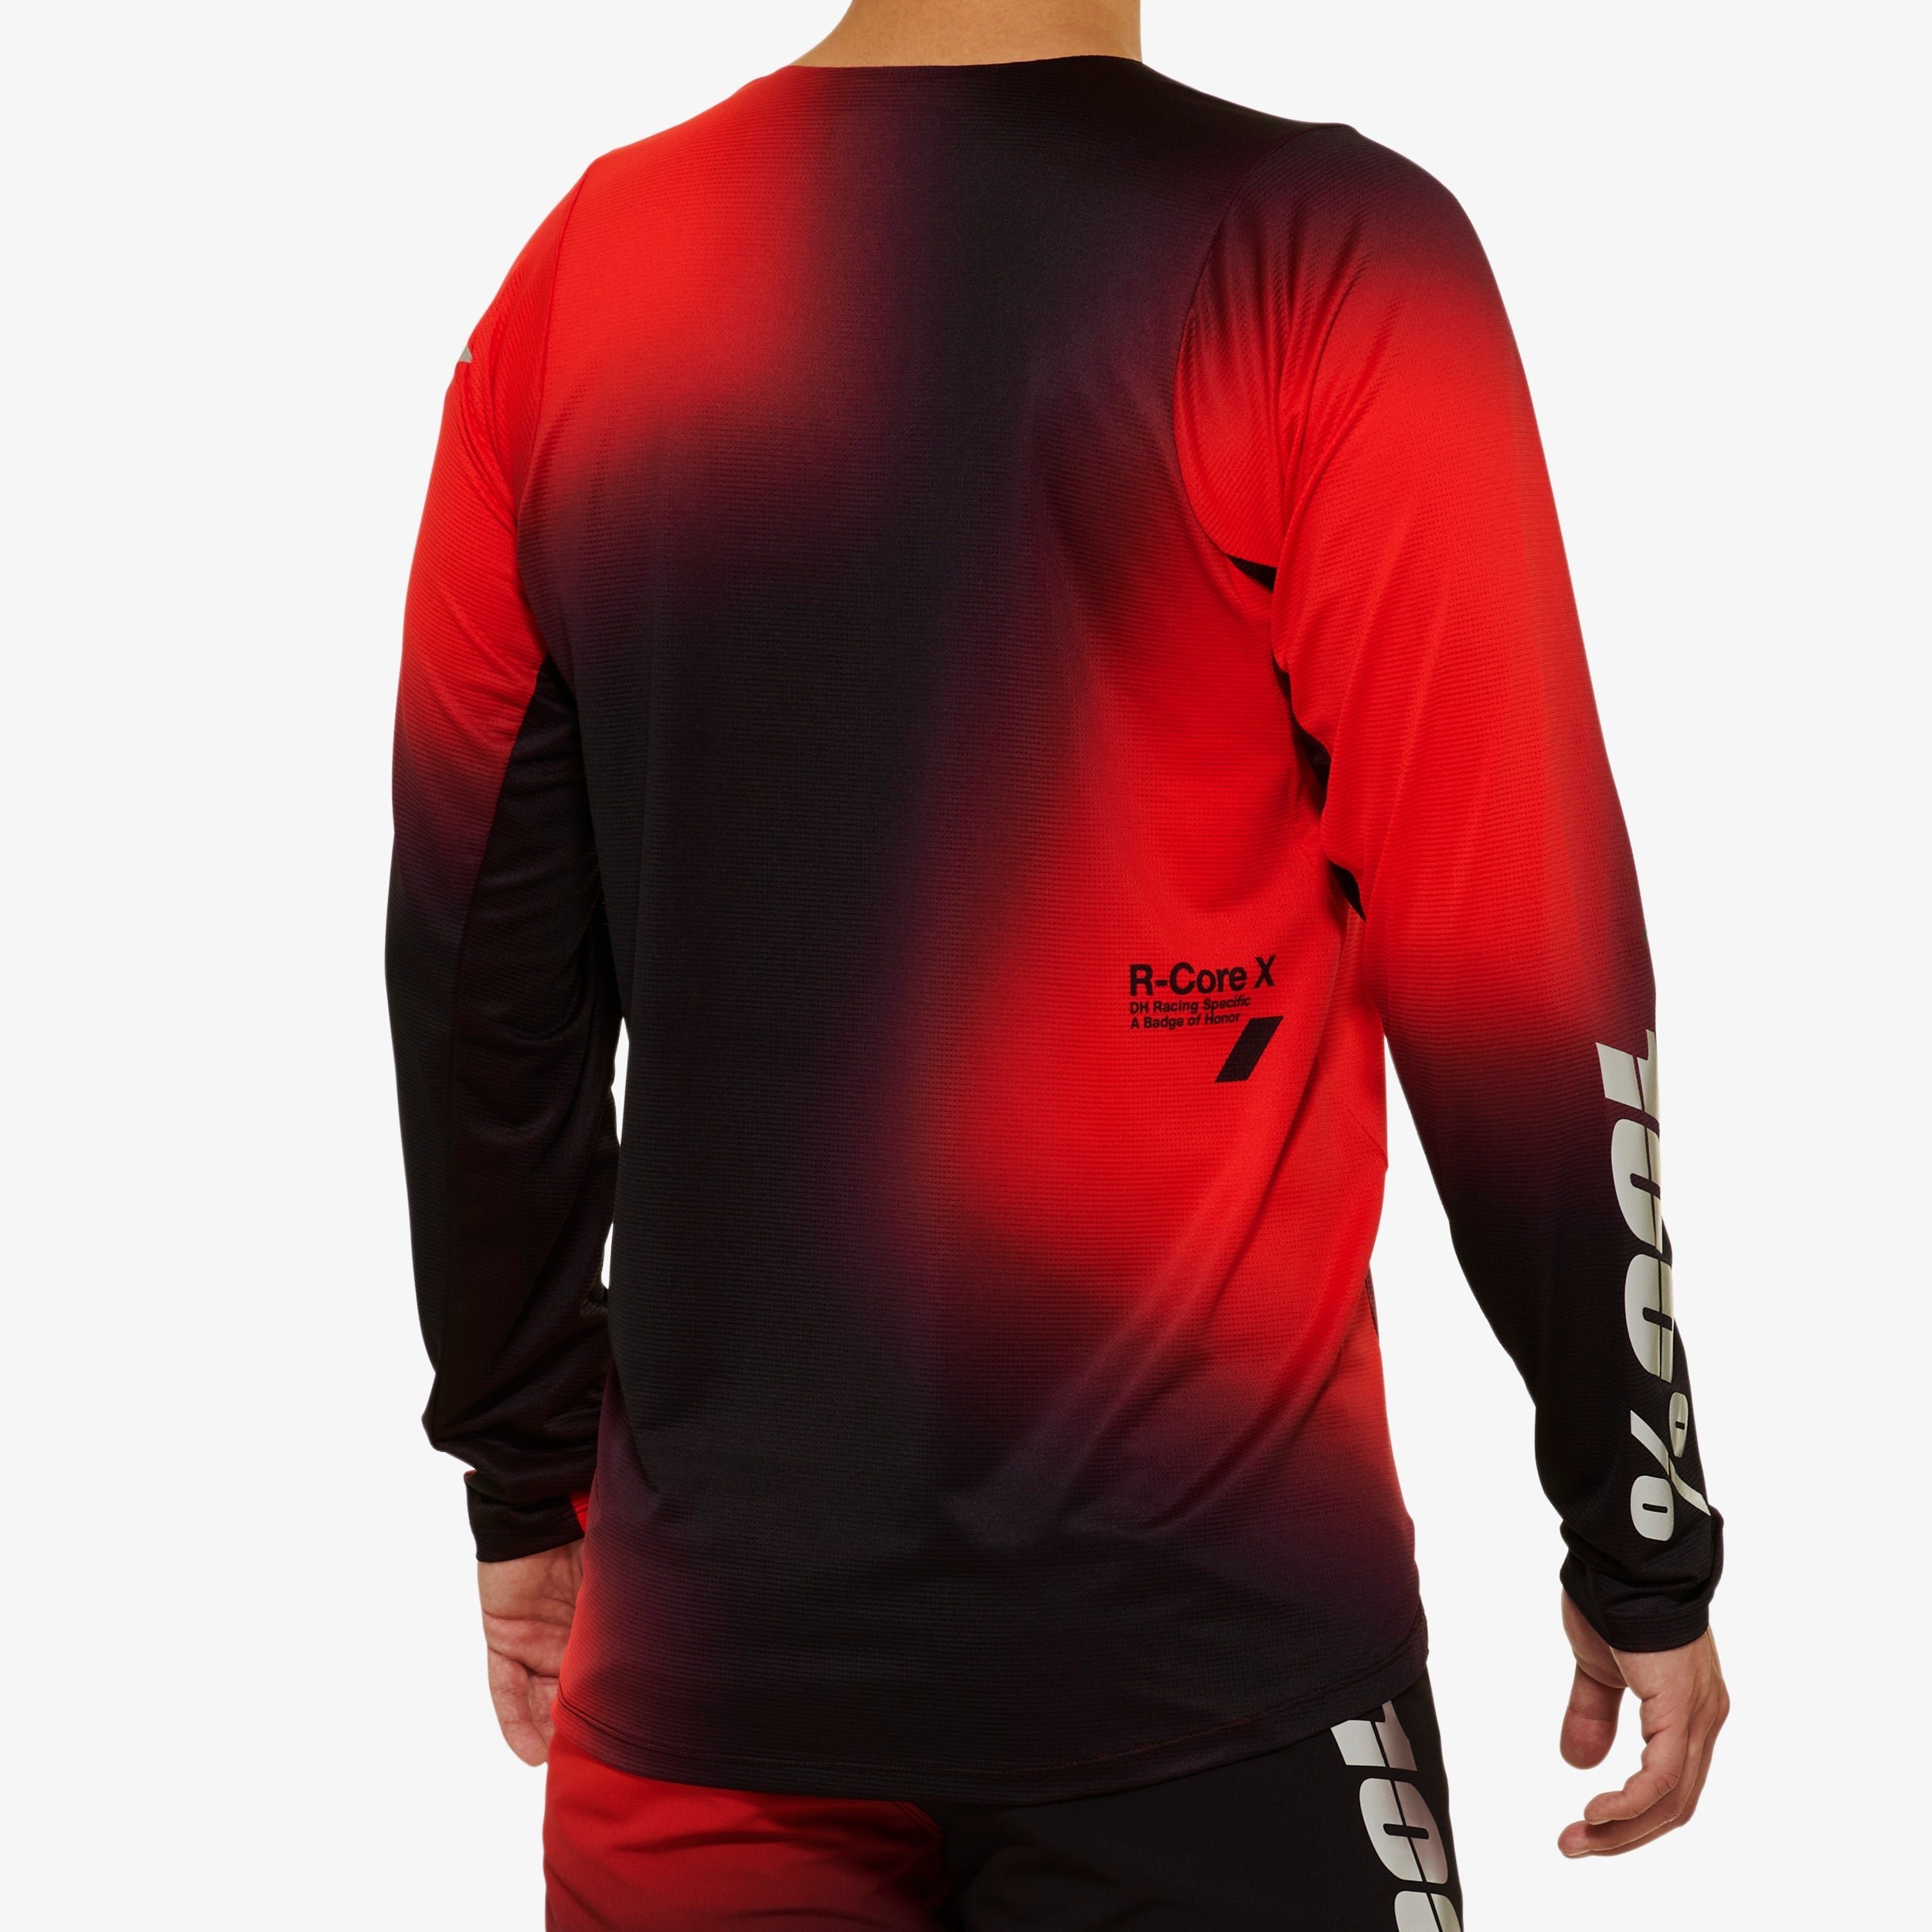 R-CORE X LE Long Sleeve Jersey Black/Red - Secondary